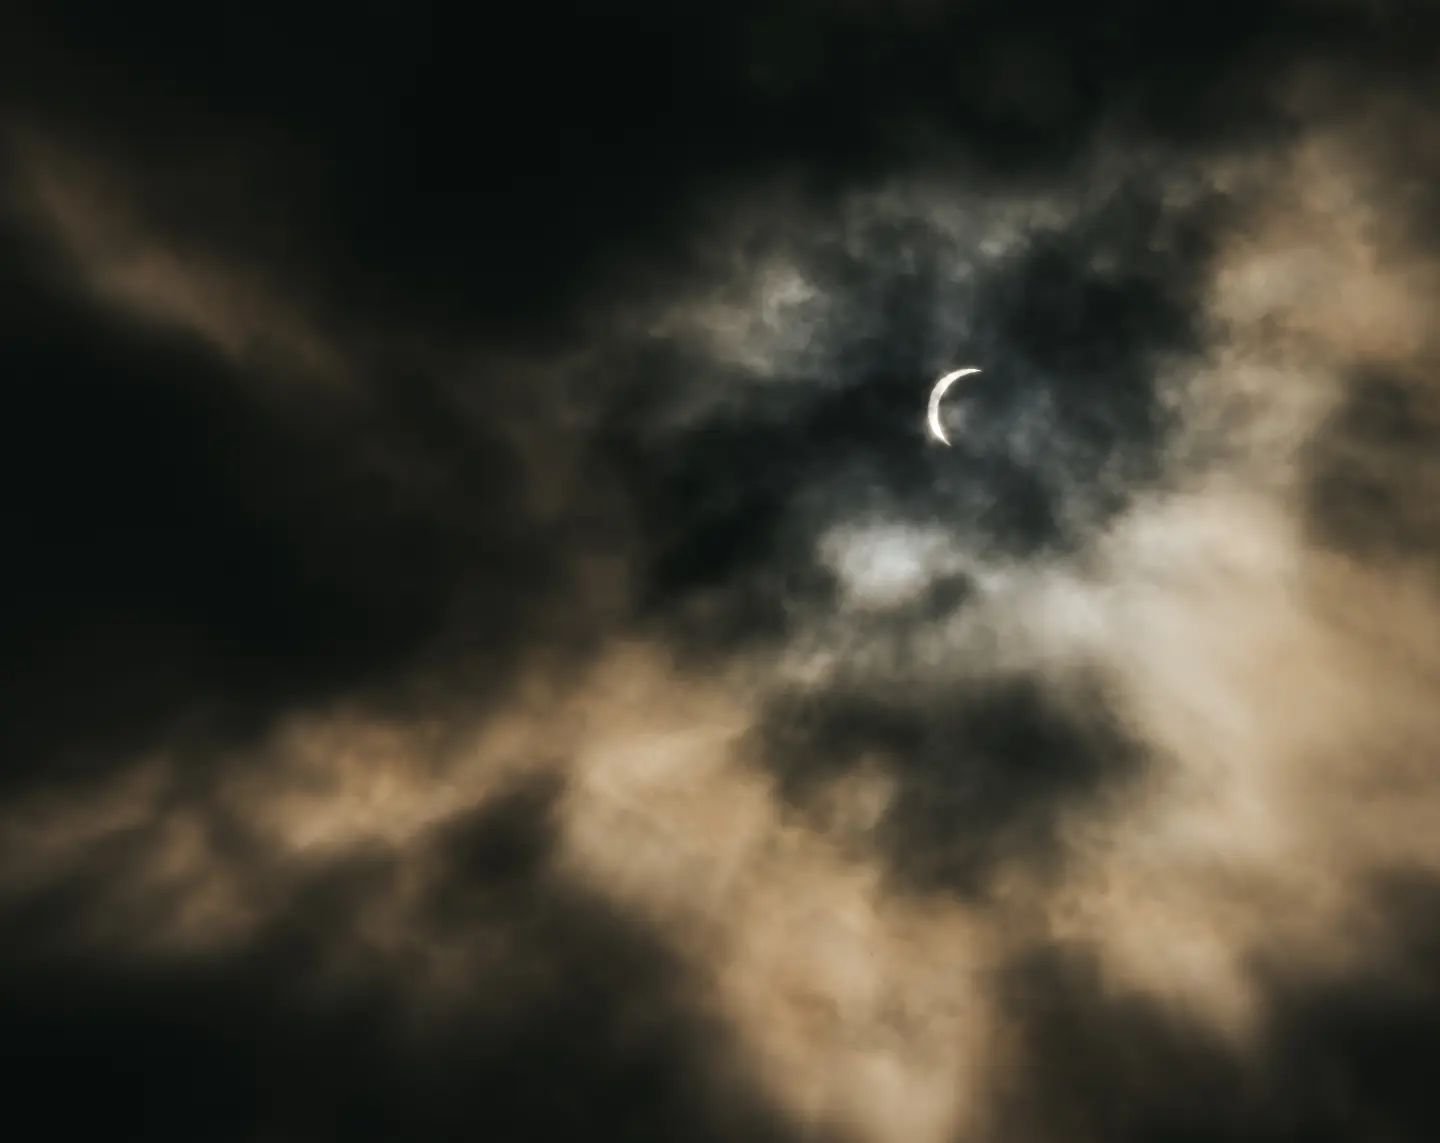 I was worried about the cloud coverage but it gives a really nice foreground.. 

#eclipse #totaleclipse #2024 #astro #astrophotography #astrology